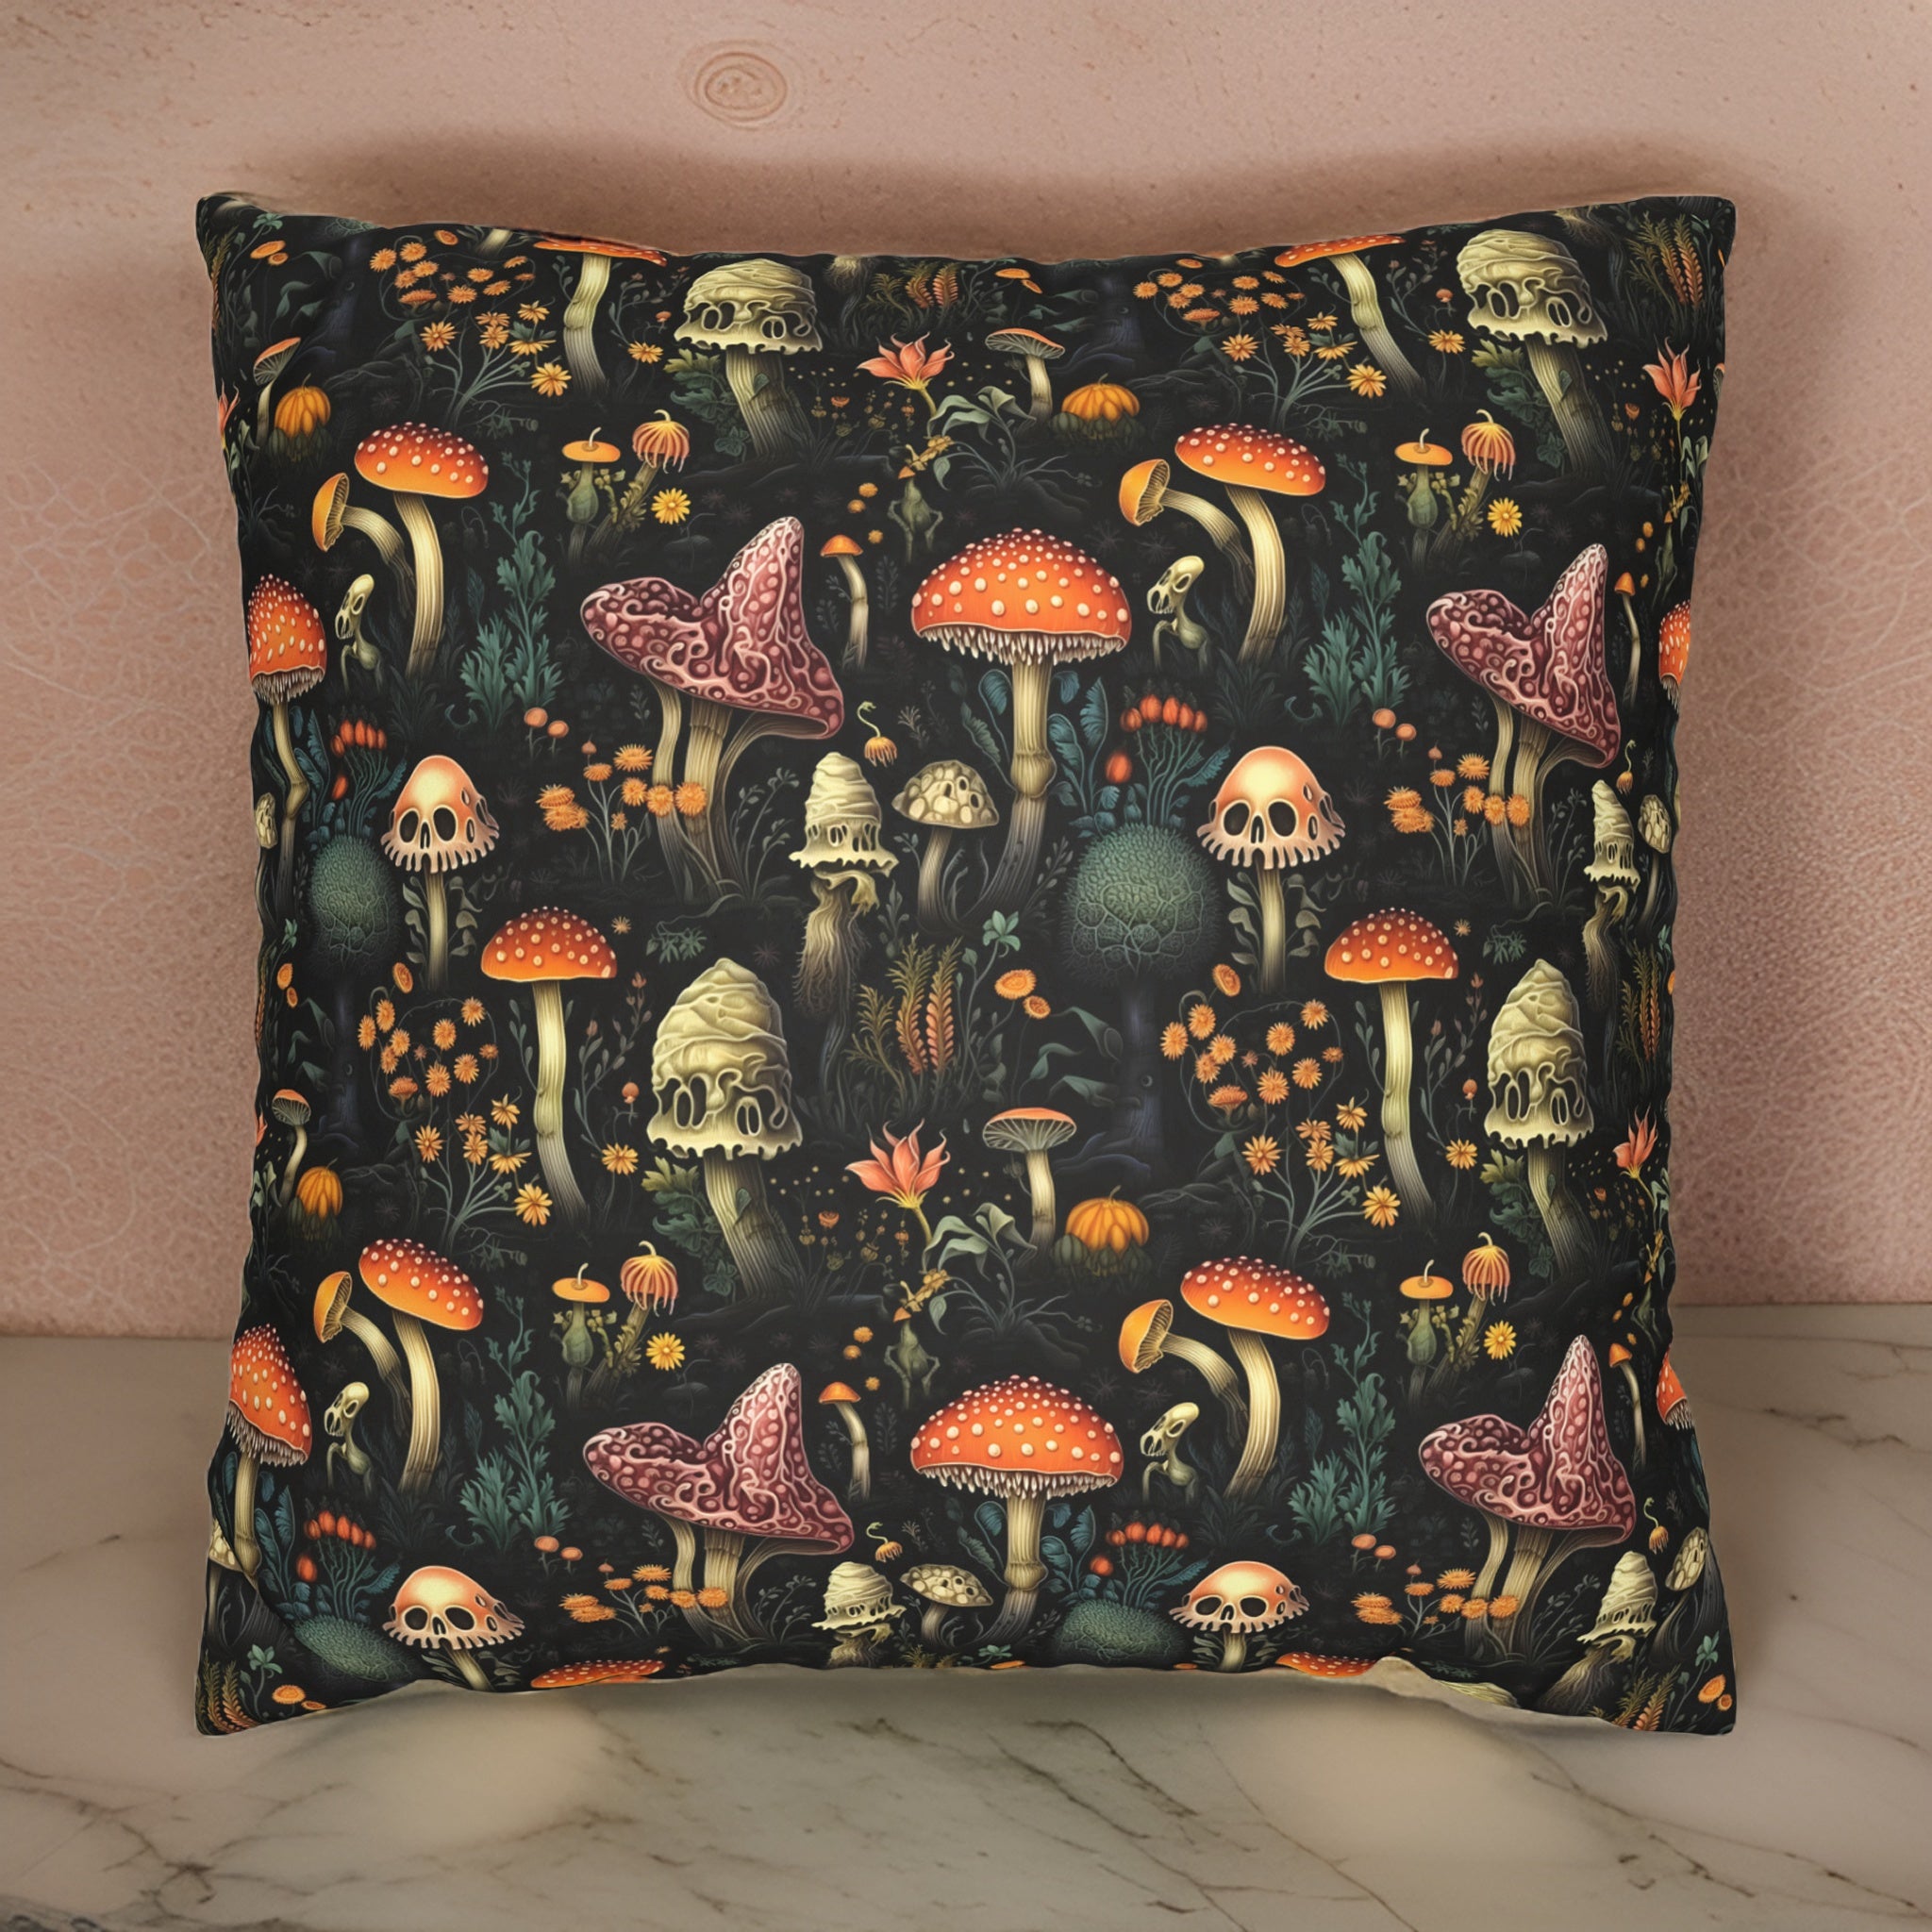 Dark Dweller Mushroom Faux Suede Pillow or Pillow Cover